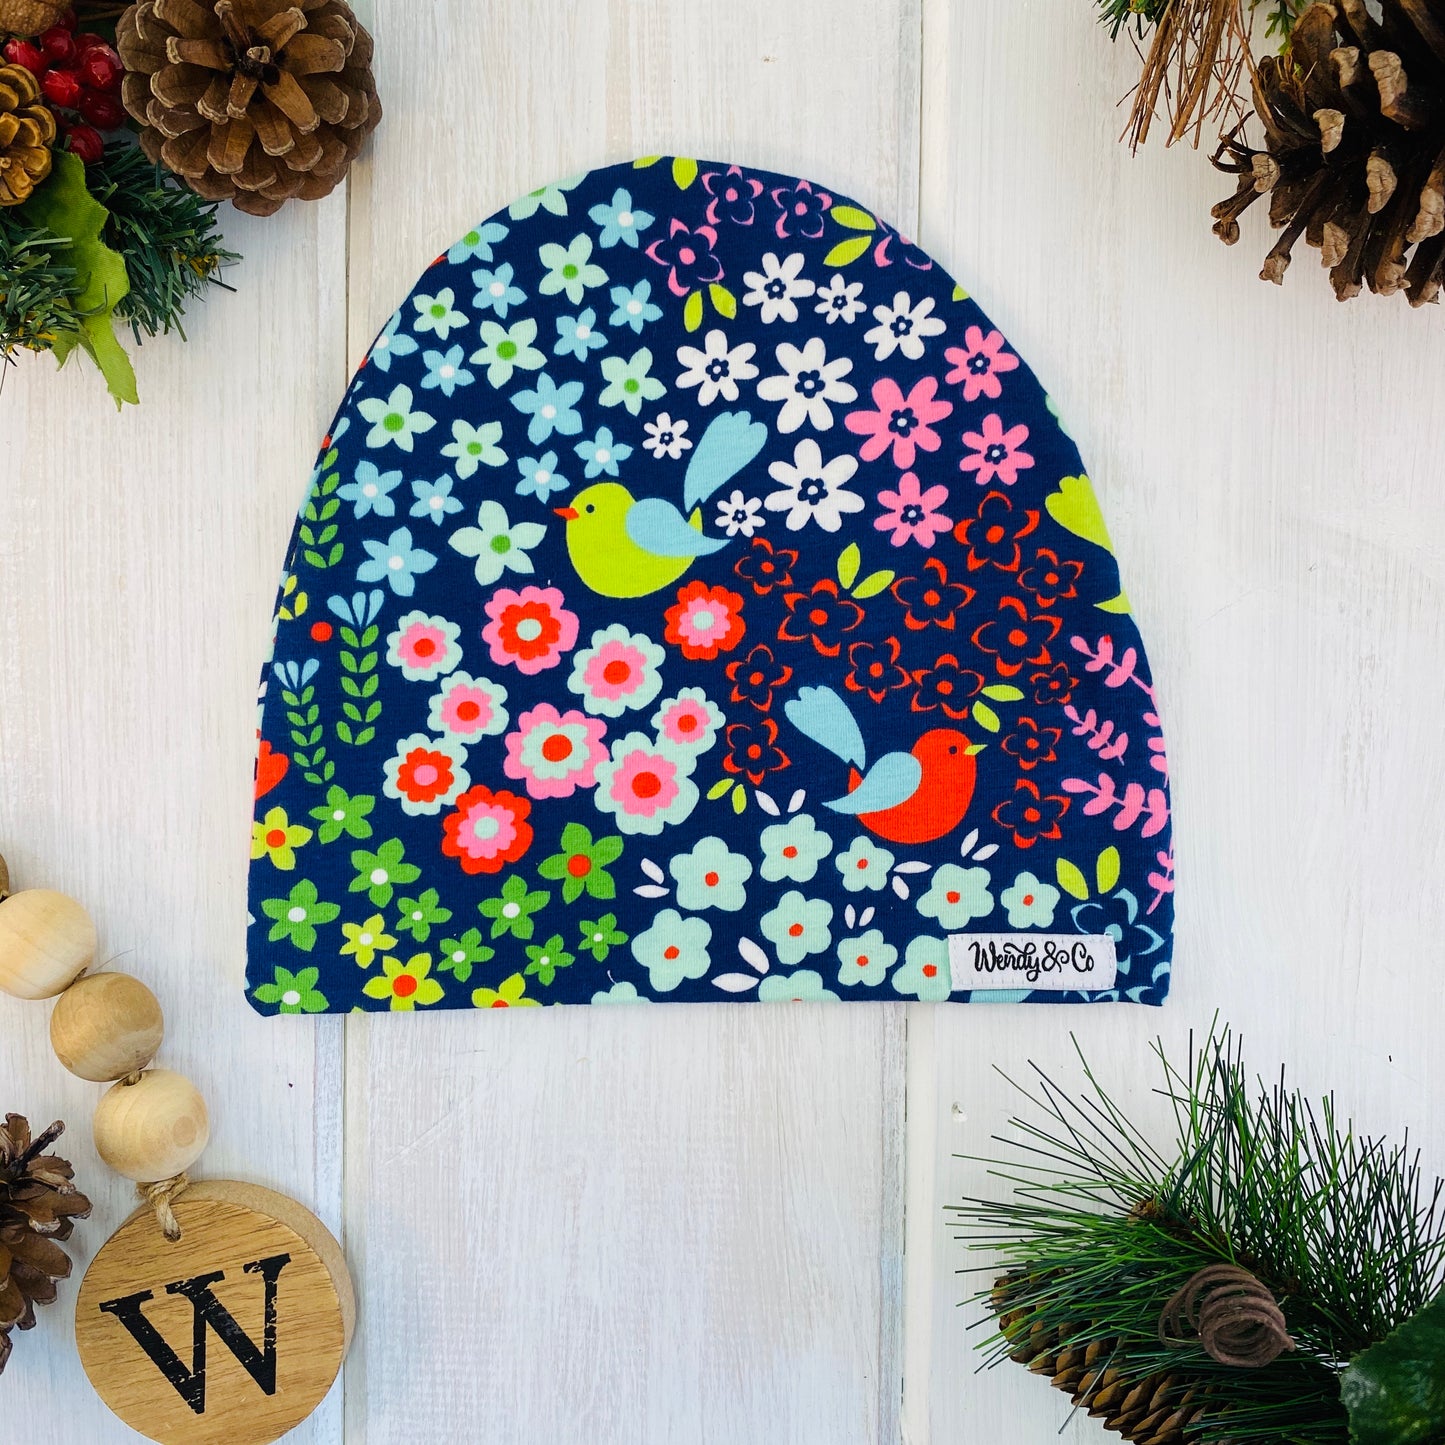 Bright floral pattern with red, mint, pink, blue, green flowers and birds on a navy background. Slouchy beanie modern fit for girls.